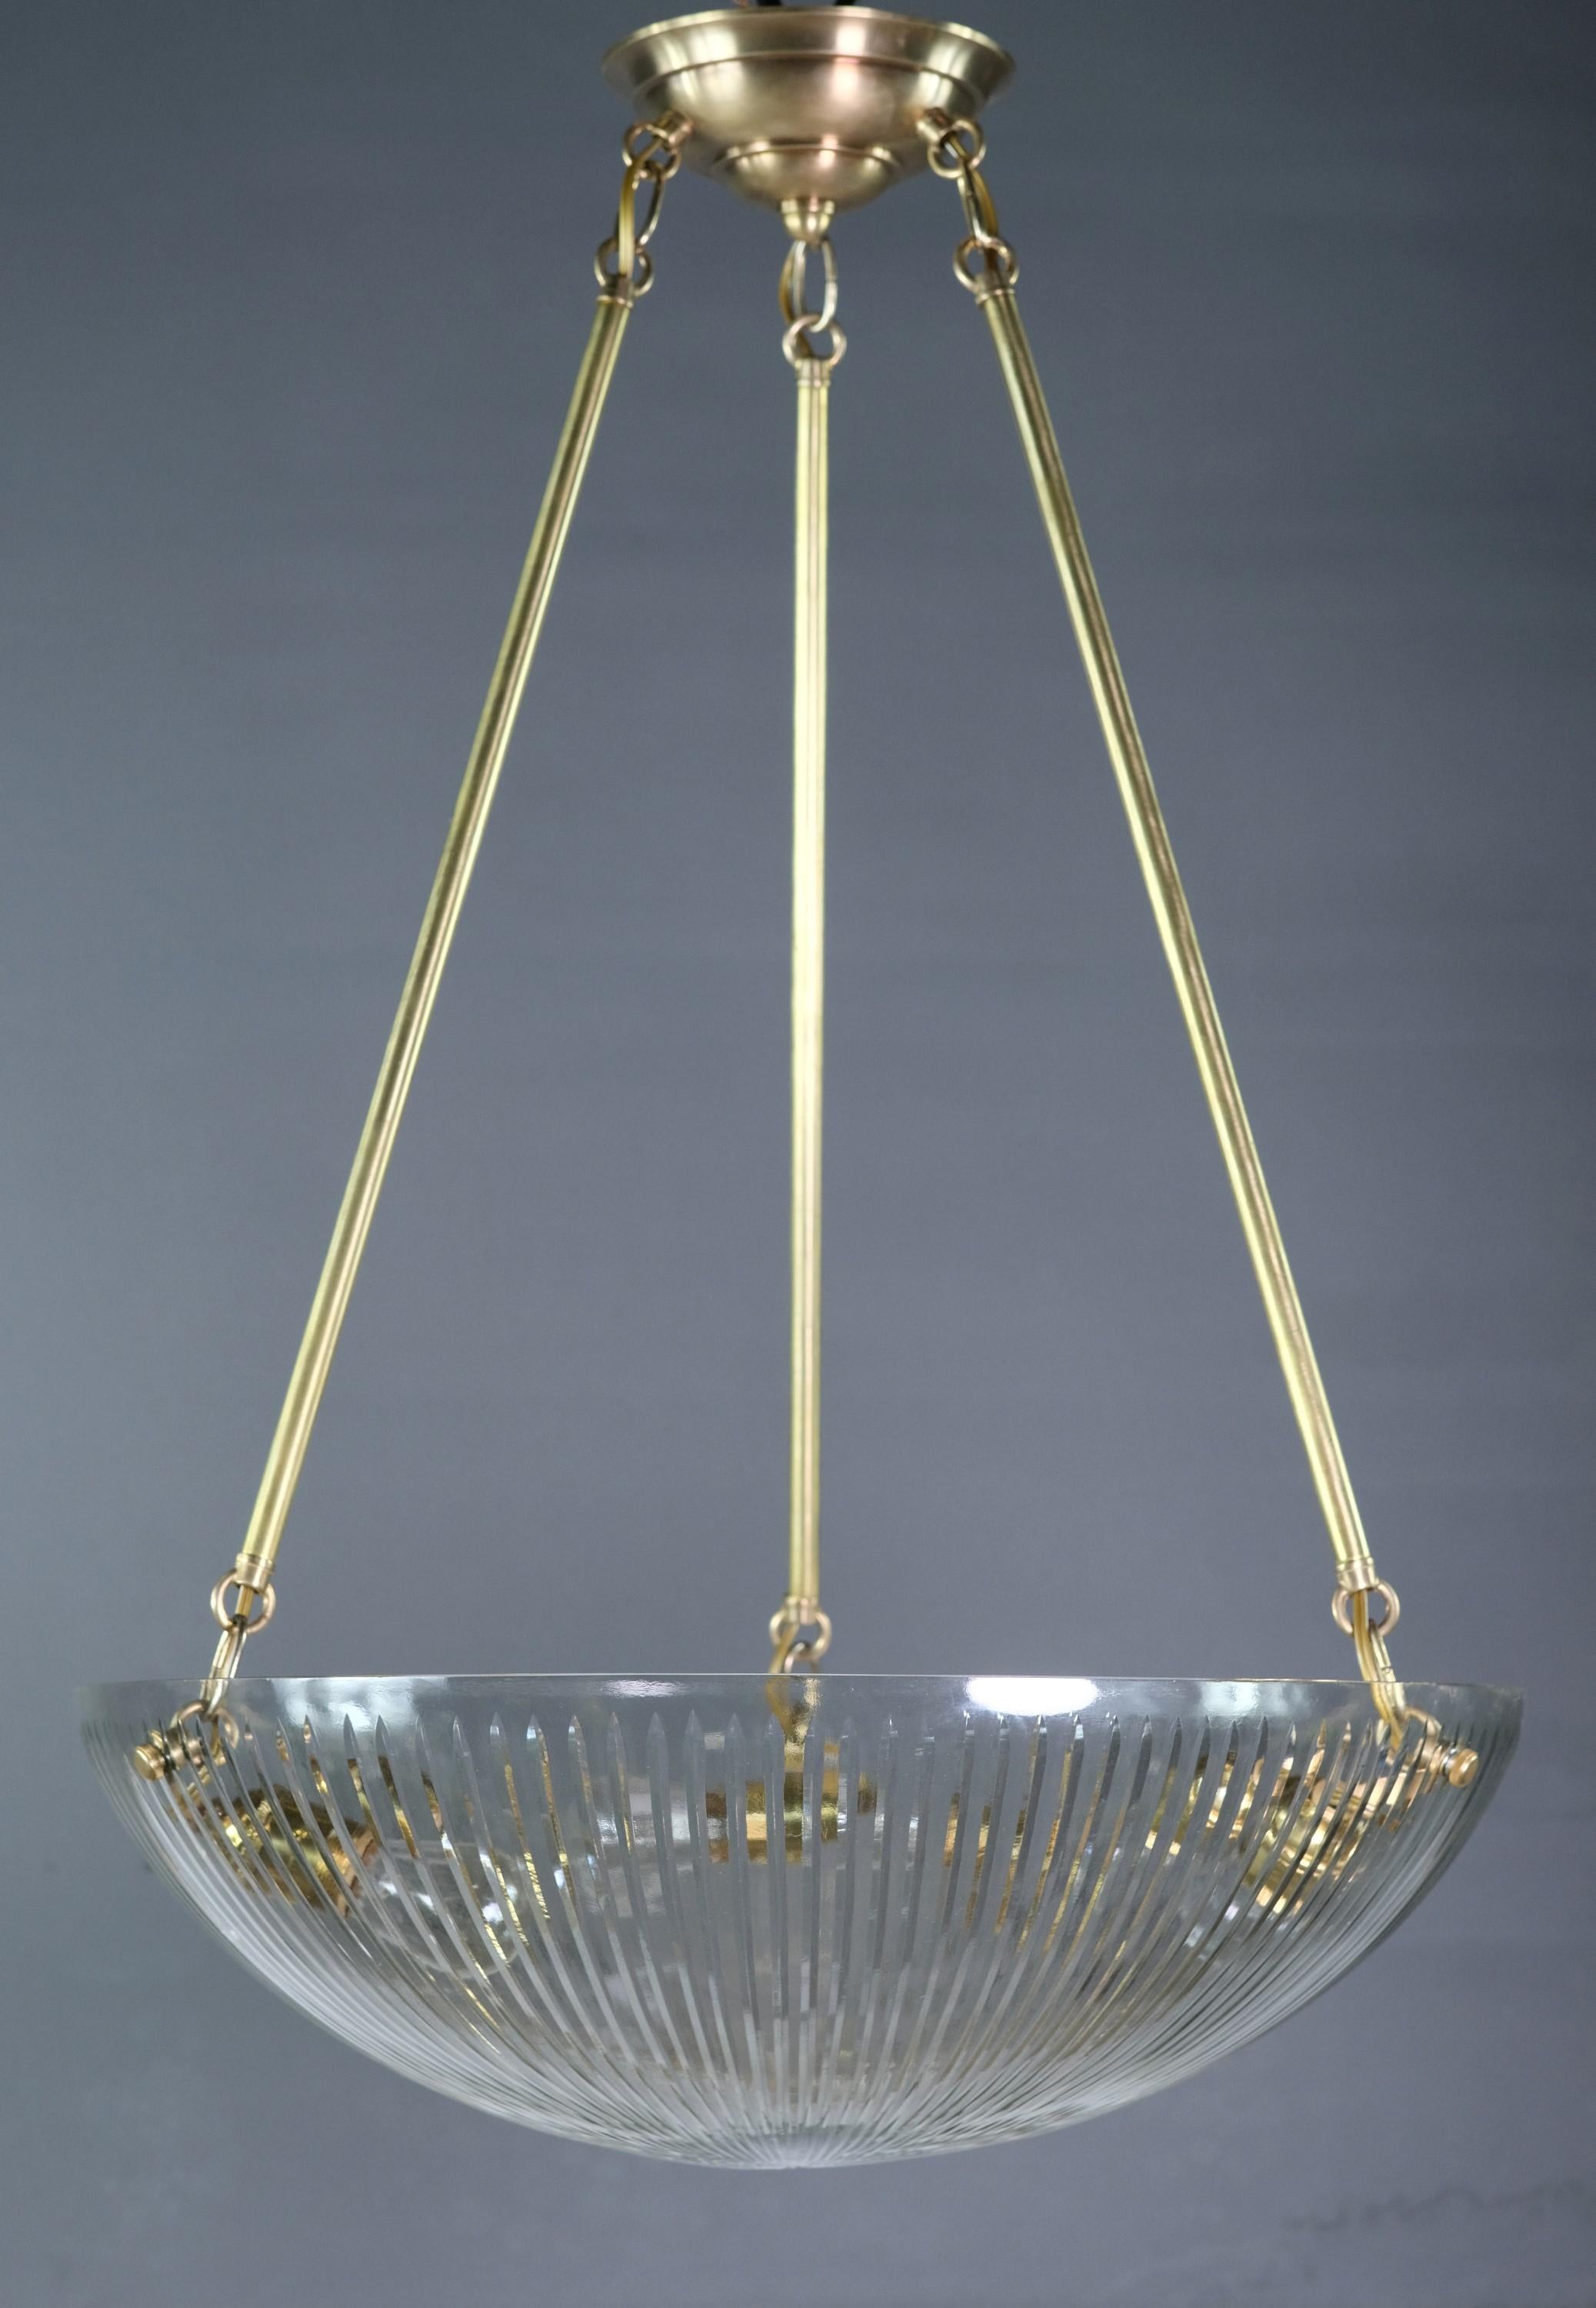 Late 20th Century pendant light with three legs mounted into a heavy clear cut glass dish shade. Holds three standard E26 light bulbs. This can be seen at our 400 Gilligan St location in Scranton, PA.